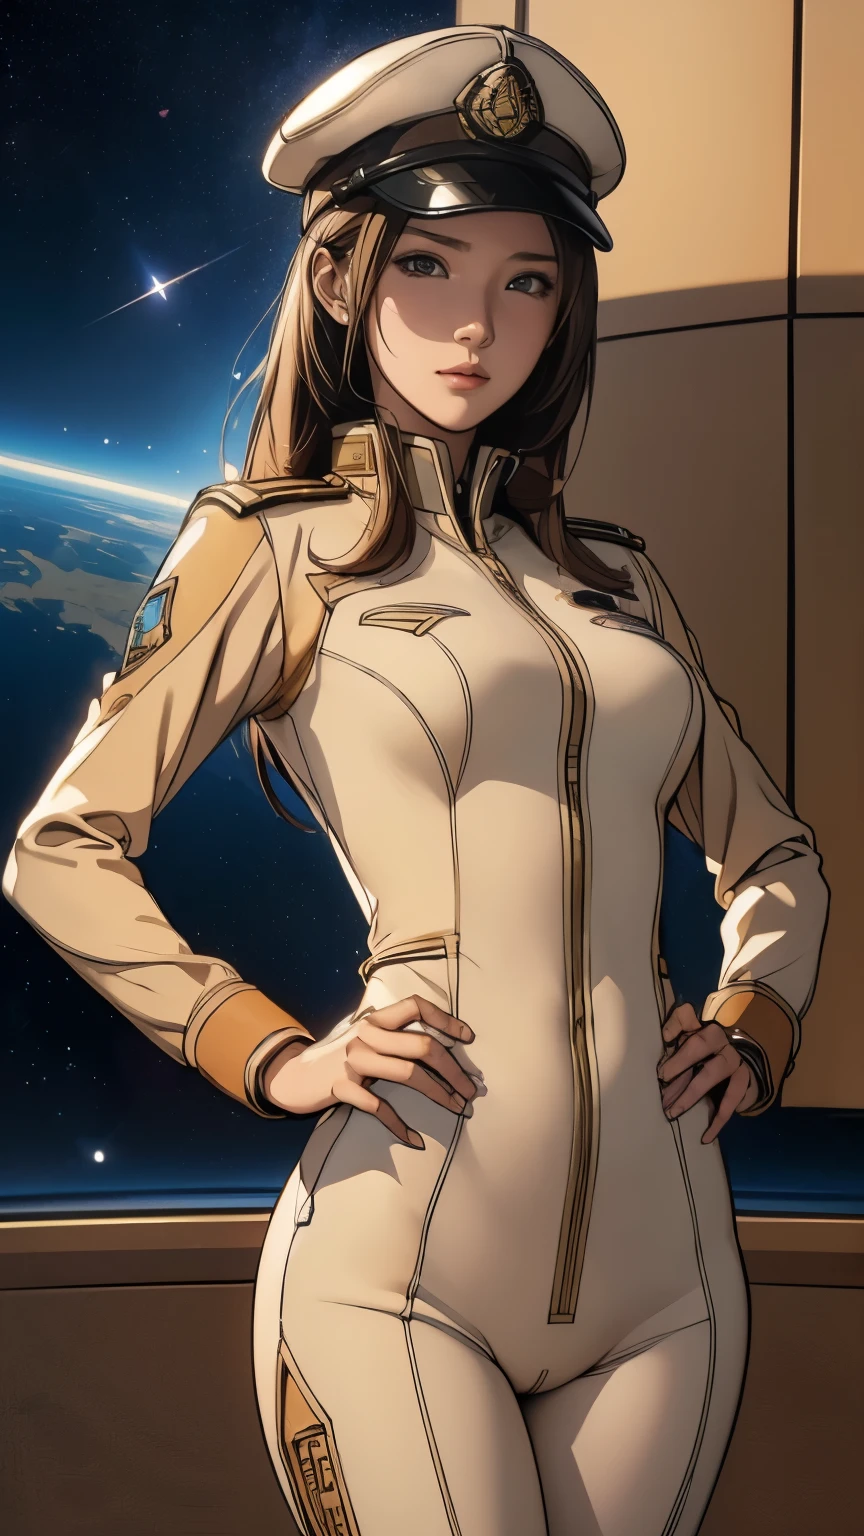 (((masterpiece,highest quality,In 8K,Super detailed,High resolution,anime style,absolutely))),(A female officer of the Earth Federation Forces is walking..:1.5),(alone:1.5), (Wearing the uniform of the Earth Federation Forces:1.5),(wearing federal employee&#39;hat of:1.5),(Cute type of girl:1.4),(Detailed facial depiction:1.4),(beautiful hands:1.4),(fine hands:1.2),(wallpaper:1.5),(whole body:1.5),((overlook:1.5)), ((15 year old Japanese girl, Fit clothing)), (inside the spaceship, Outside is space), (((camel toe)))